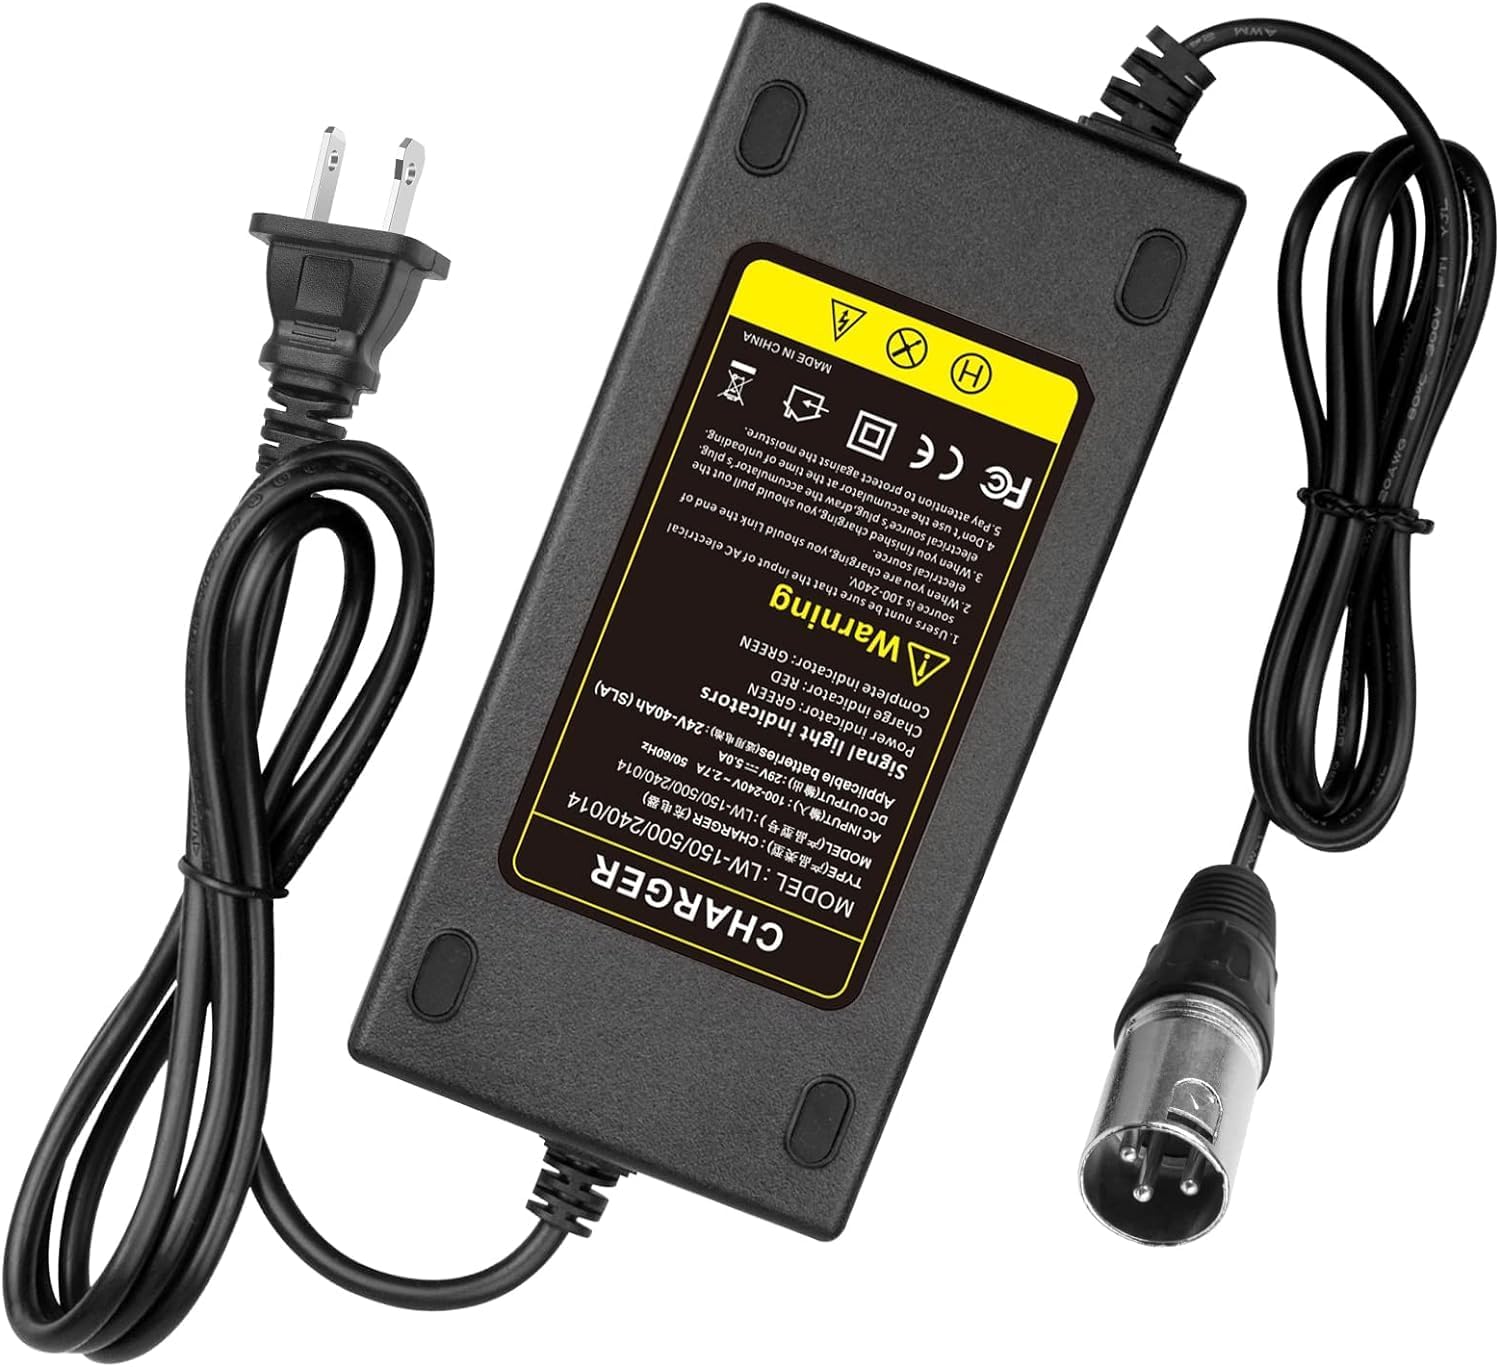 24V 5A Lead Acid Battery Charger 3-Pin Male XLR Connector for Electric Bike, Wheelchair, Mobility EA